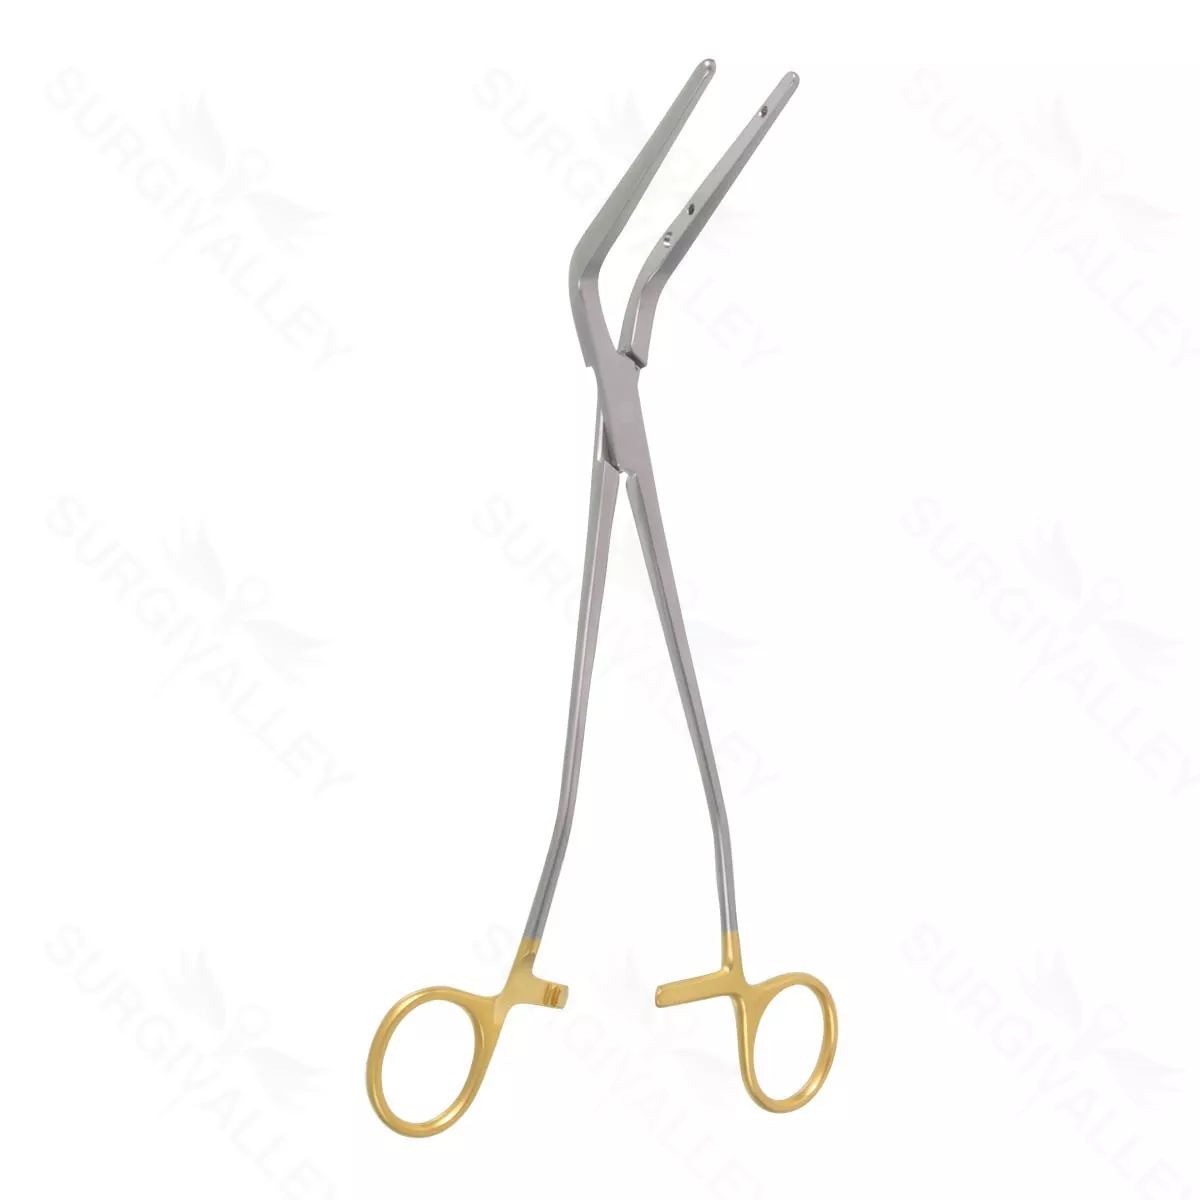 22.2cm Safe Jaw Thoracic Clamp